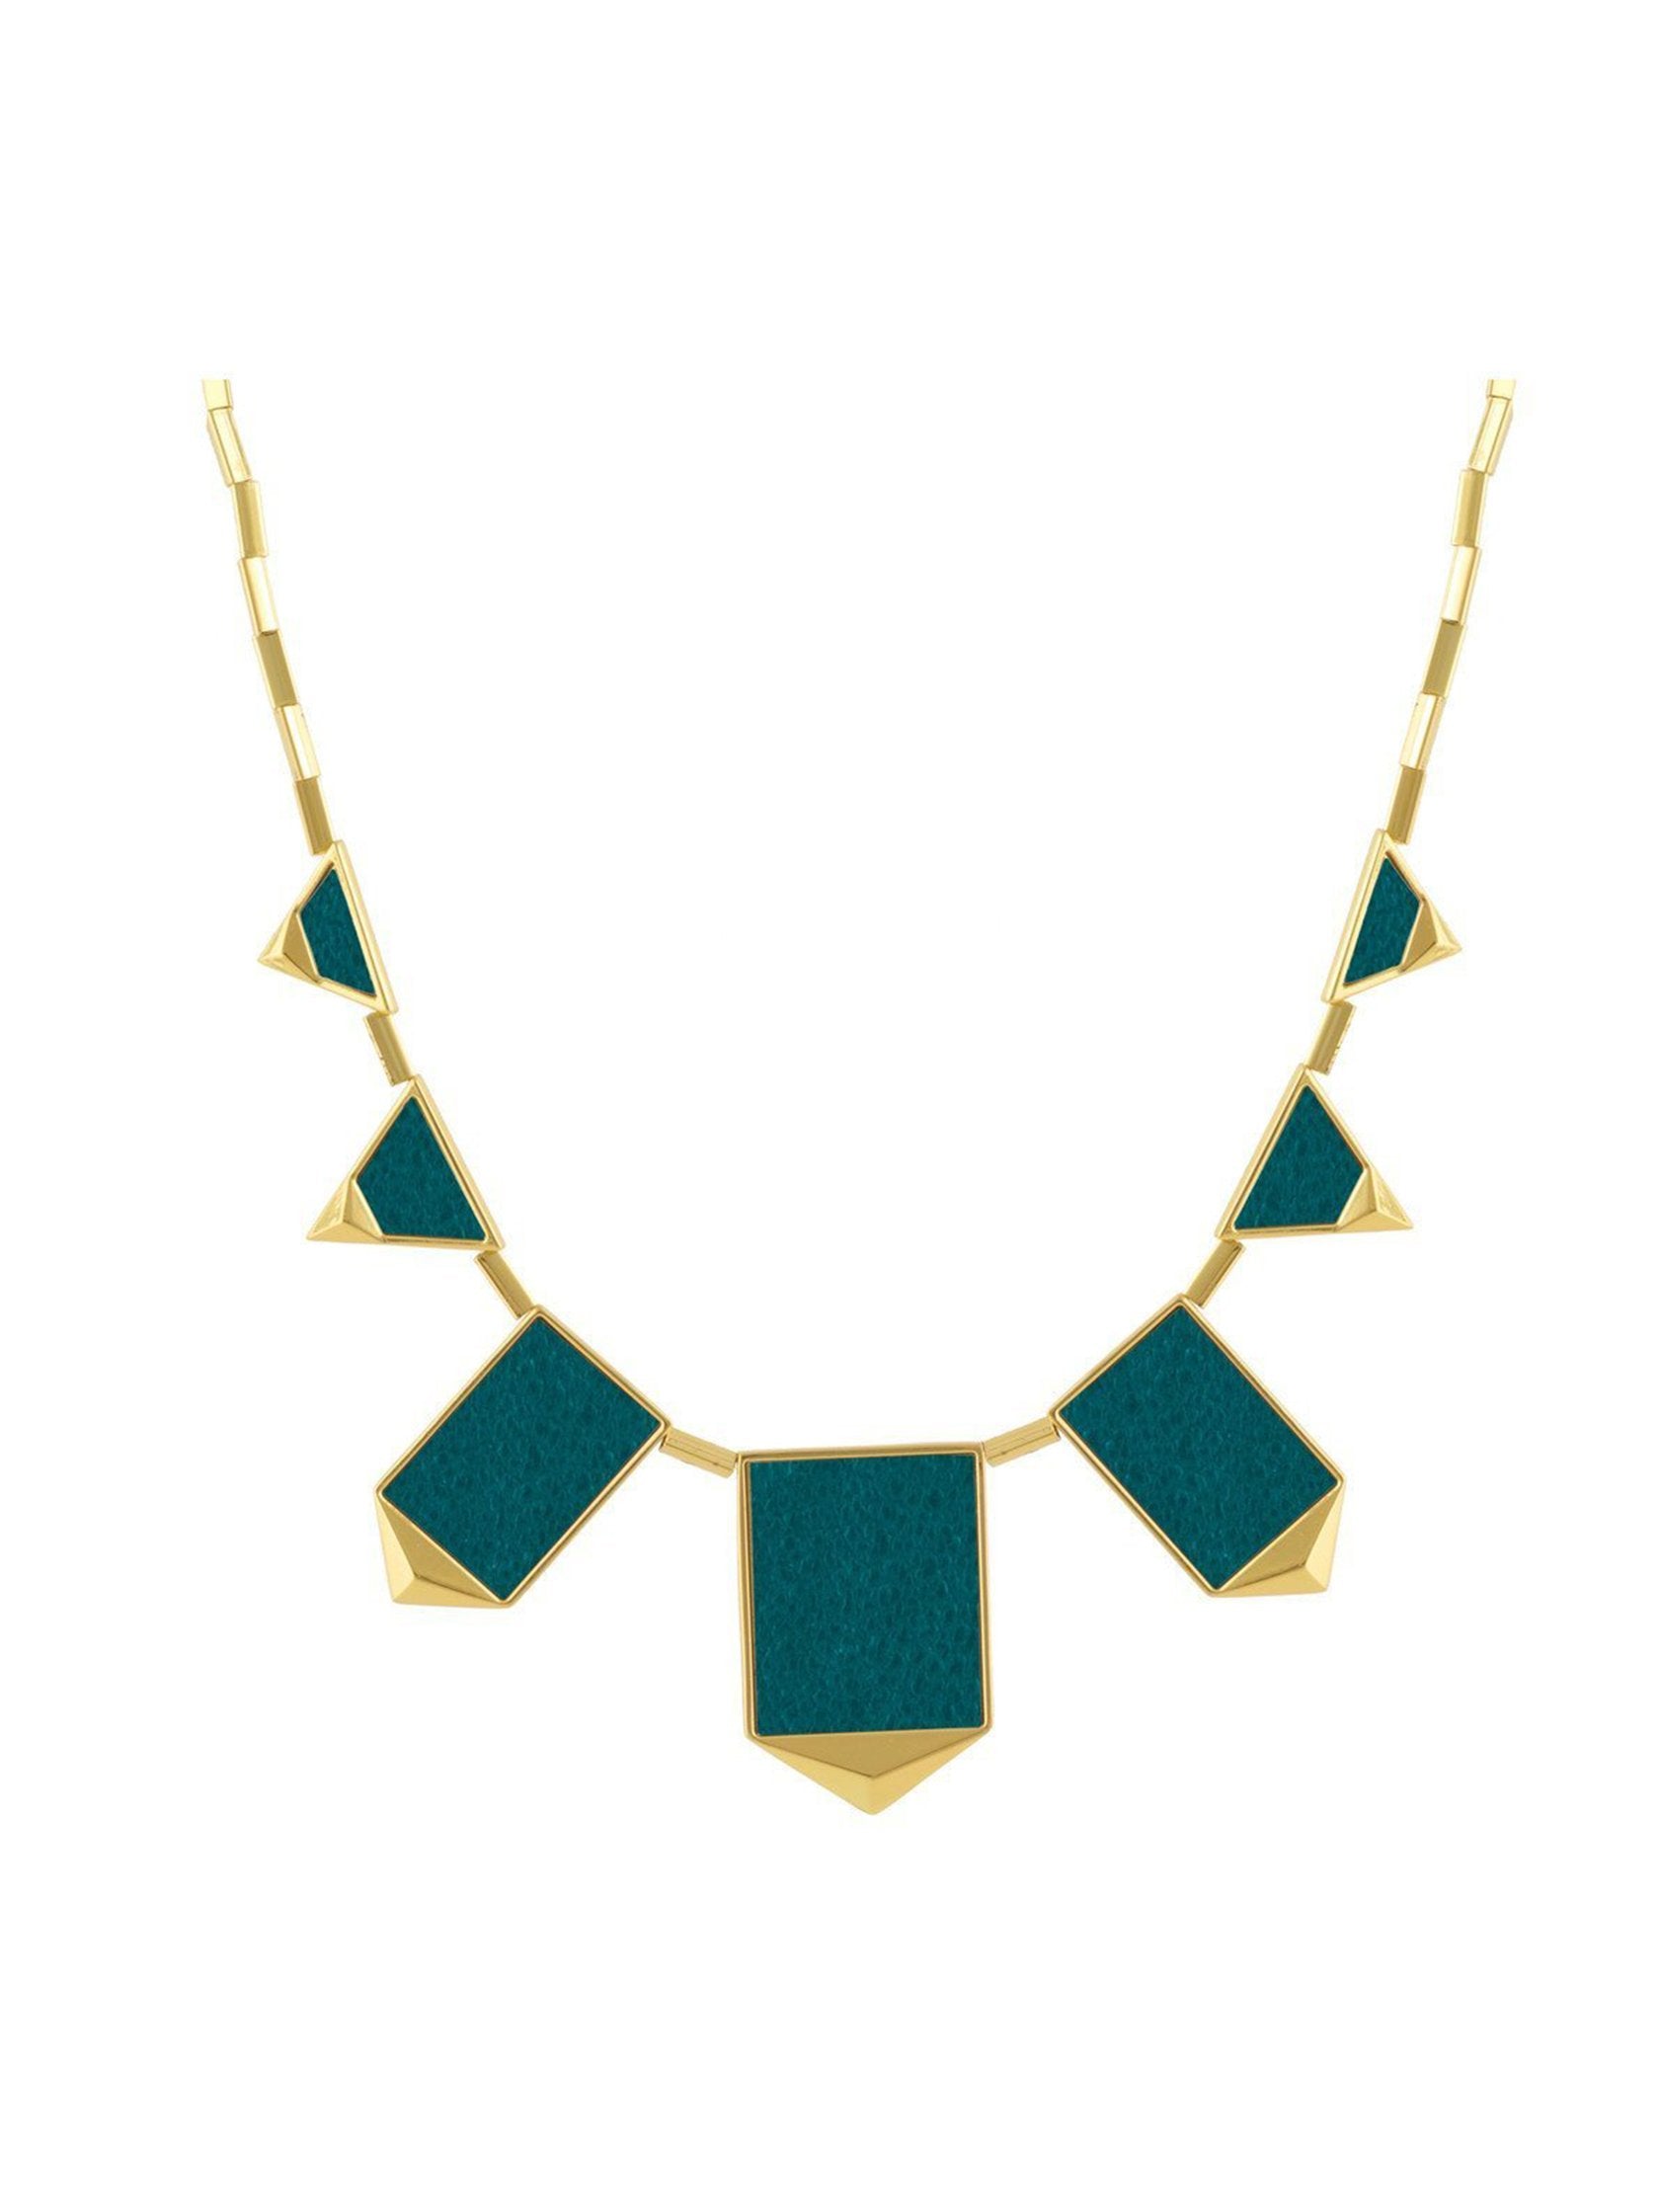 Women outfit in a necklace rental from House of Harlow 1960 called Classic Station Pyramid Necklace